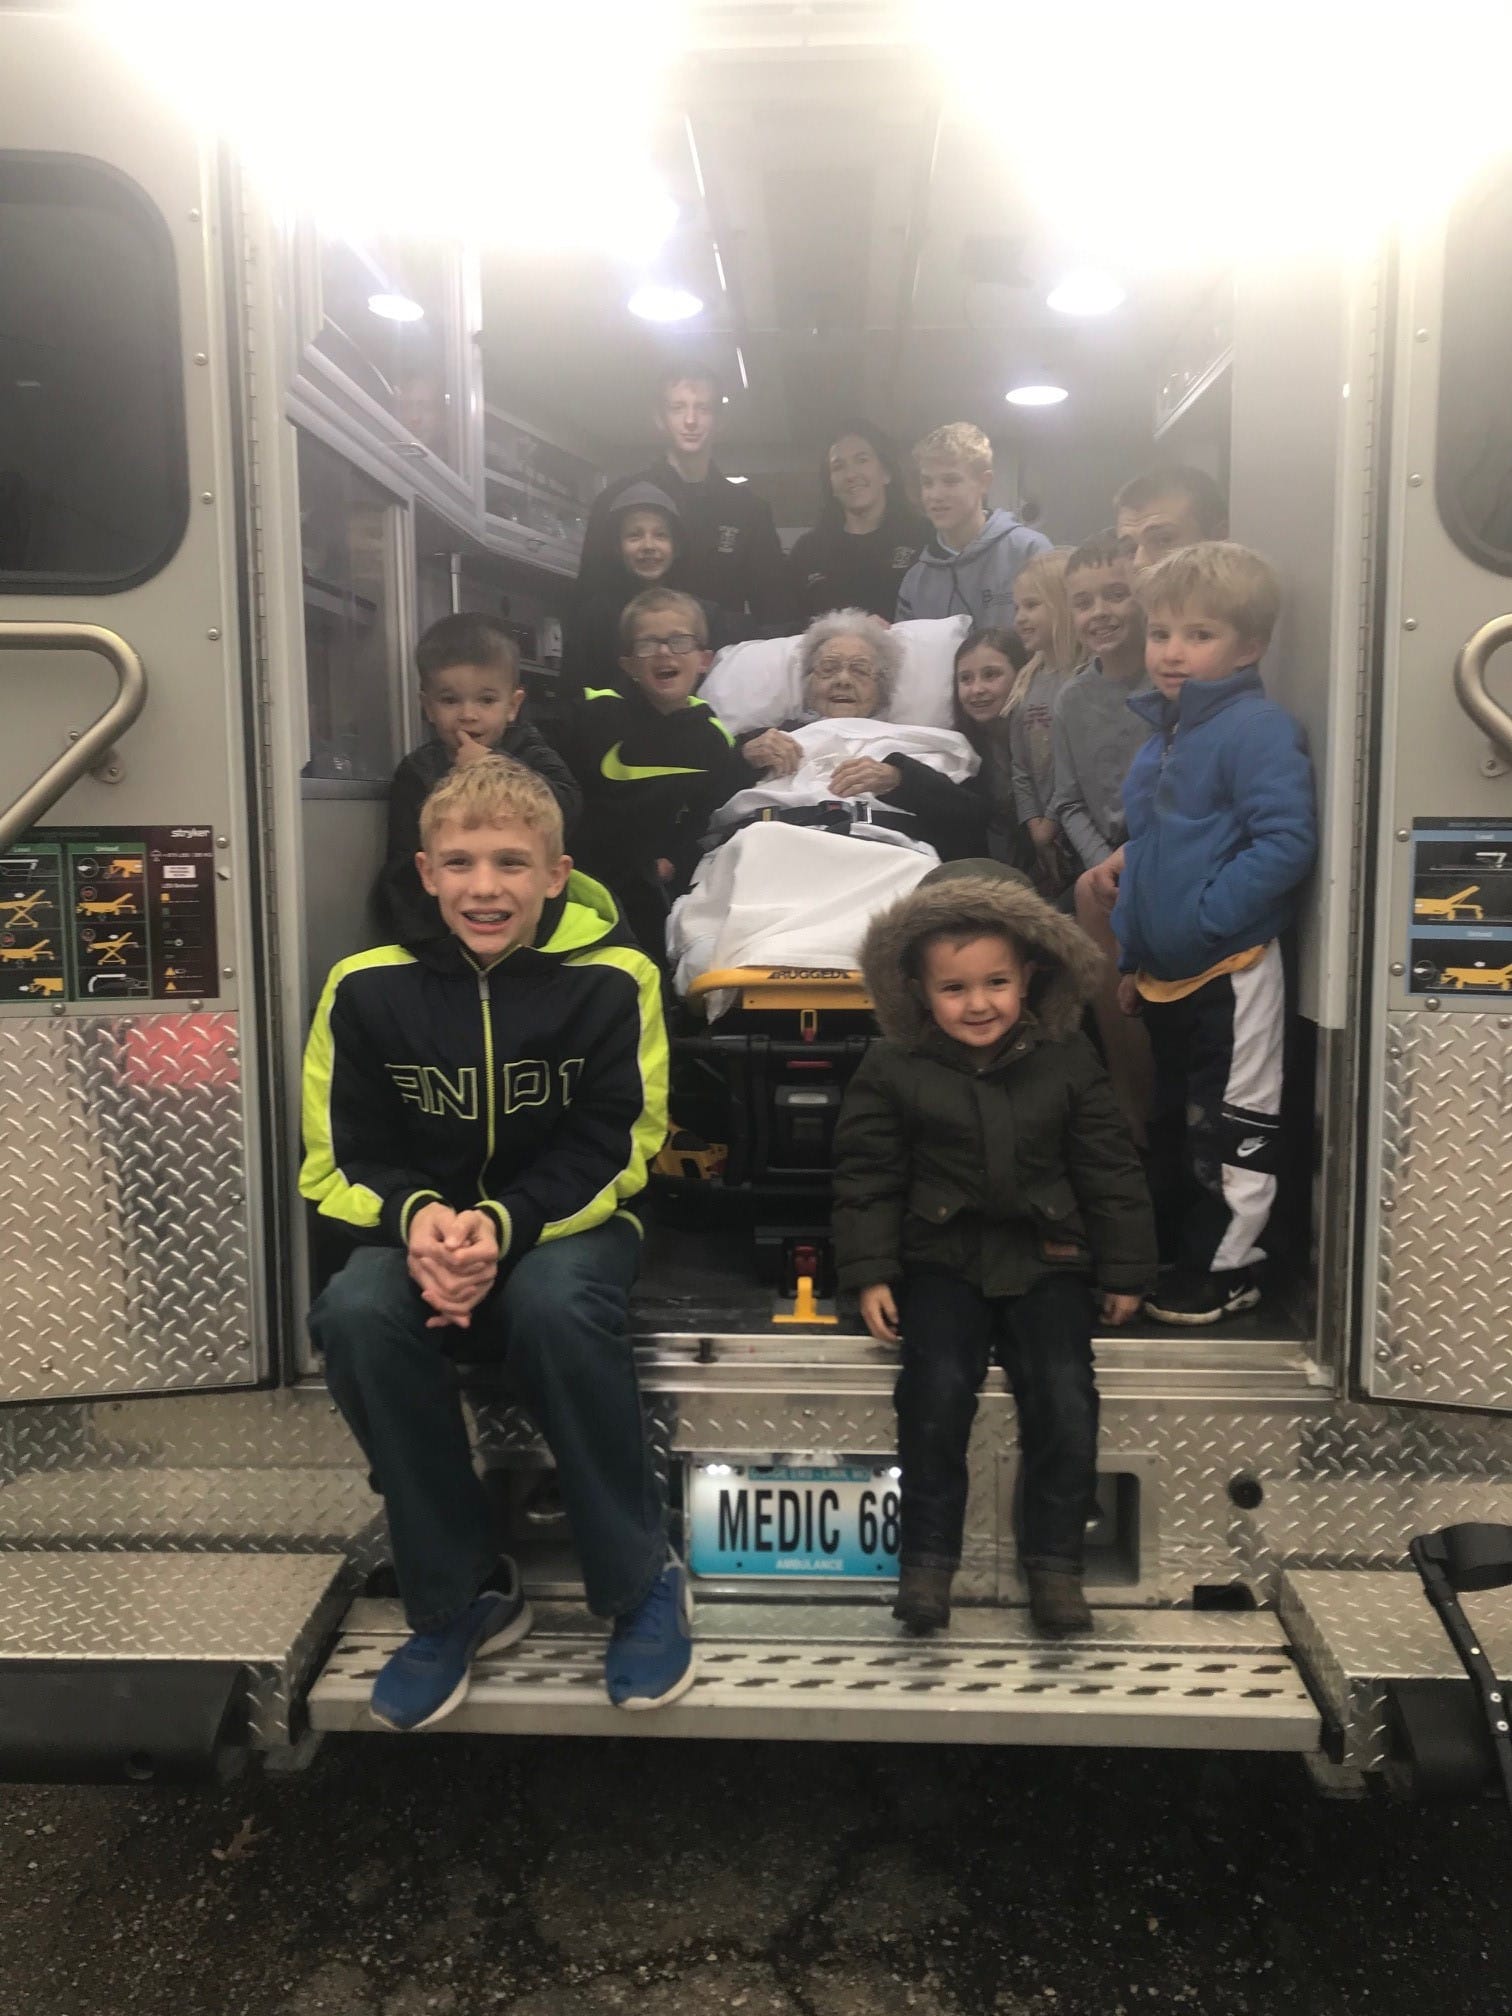 Sentimenal Program volunteers with kids and an ambulance